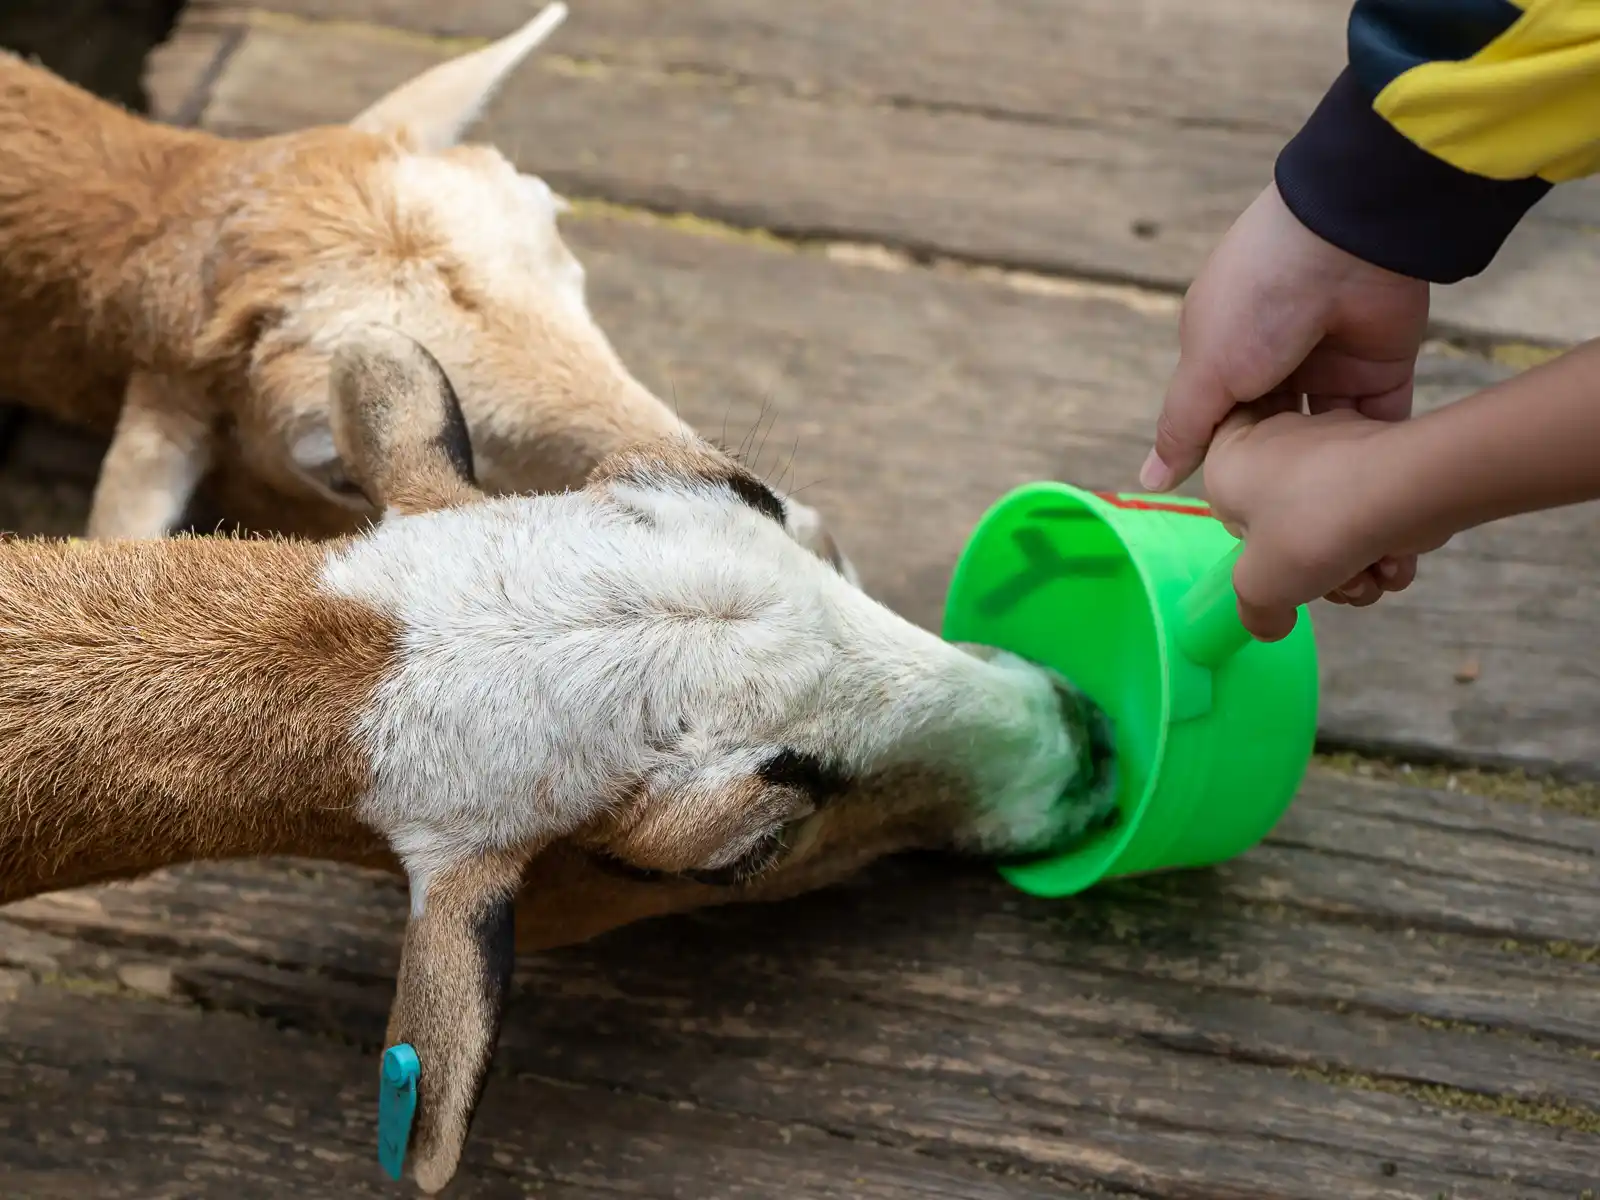 Sheep eating out of a plastic pot.